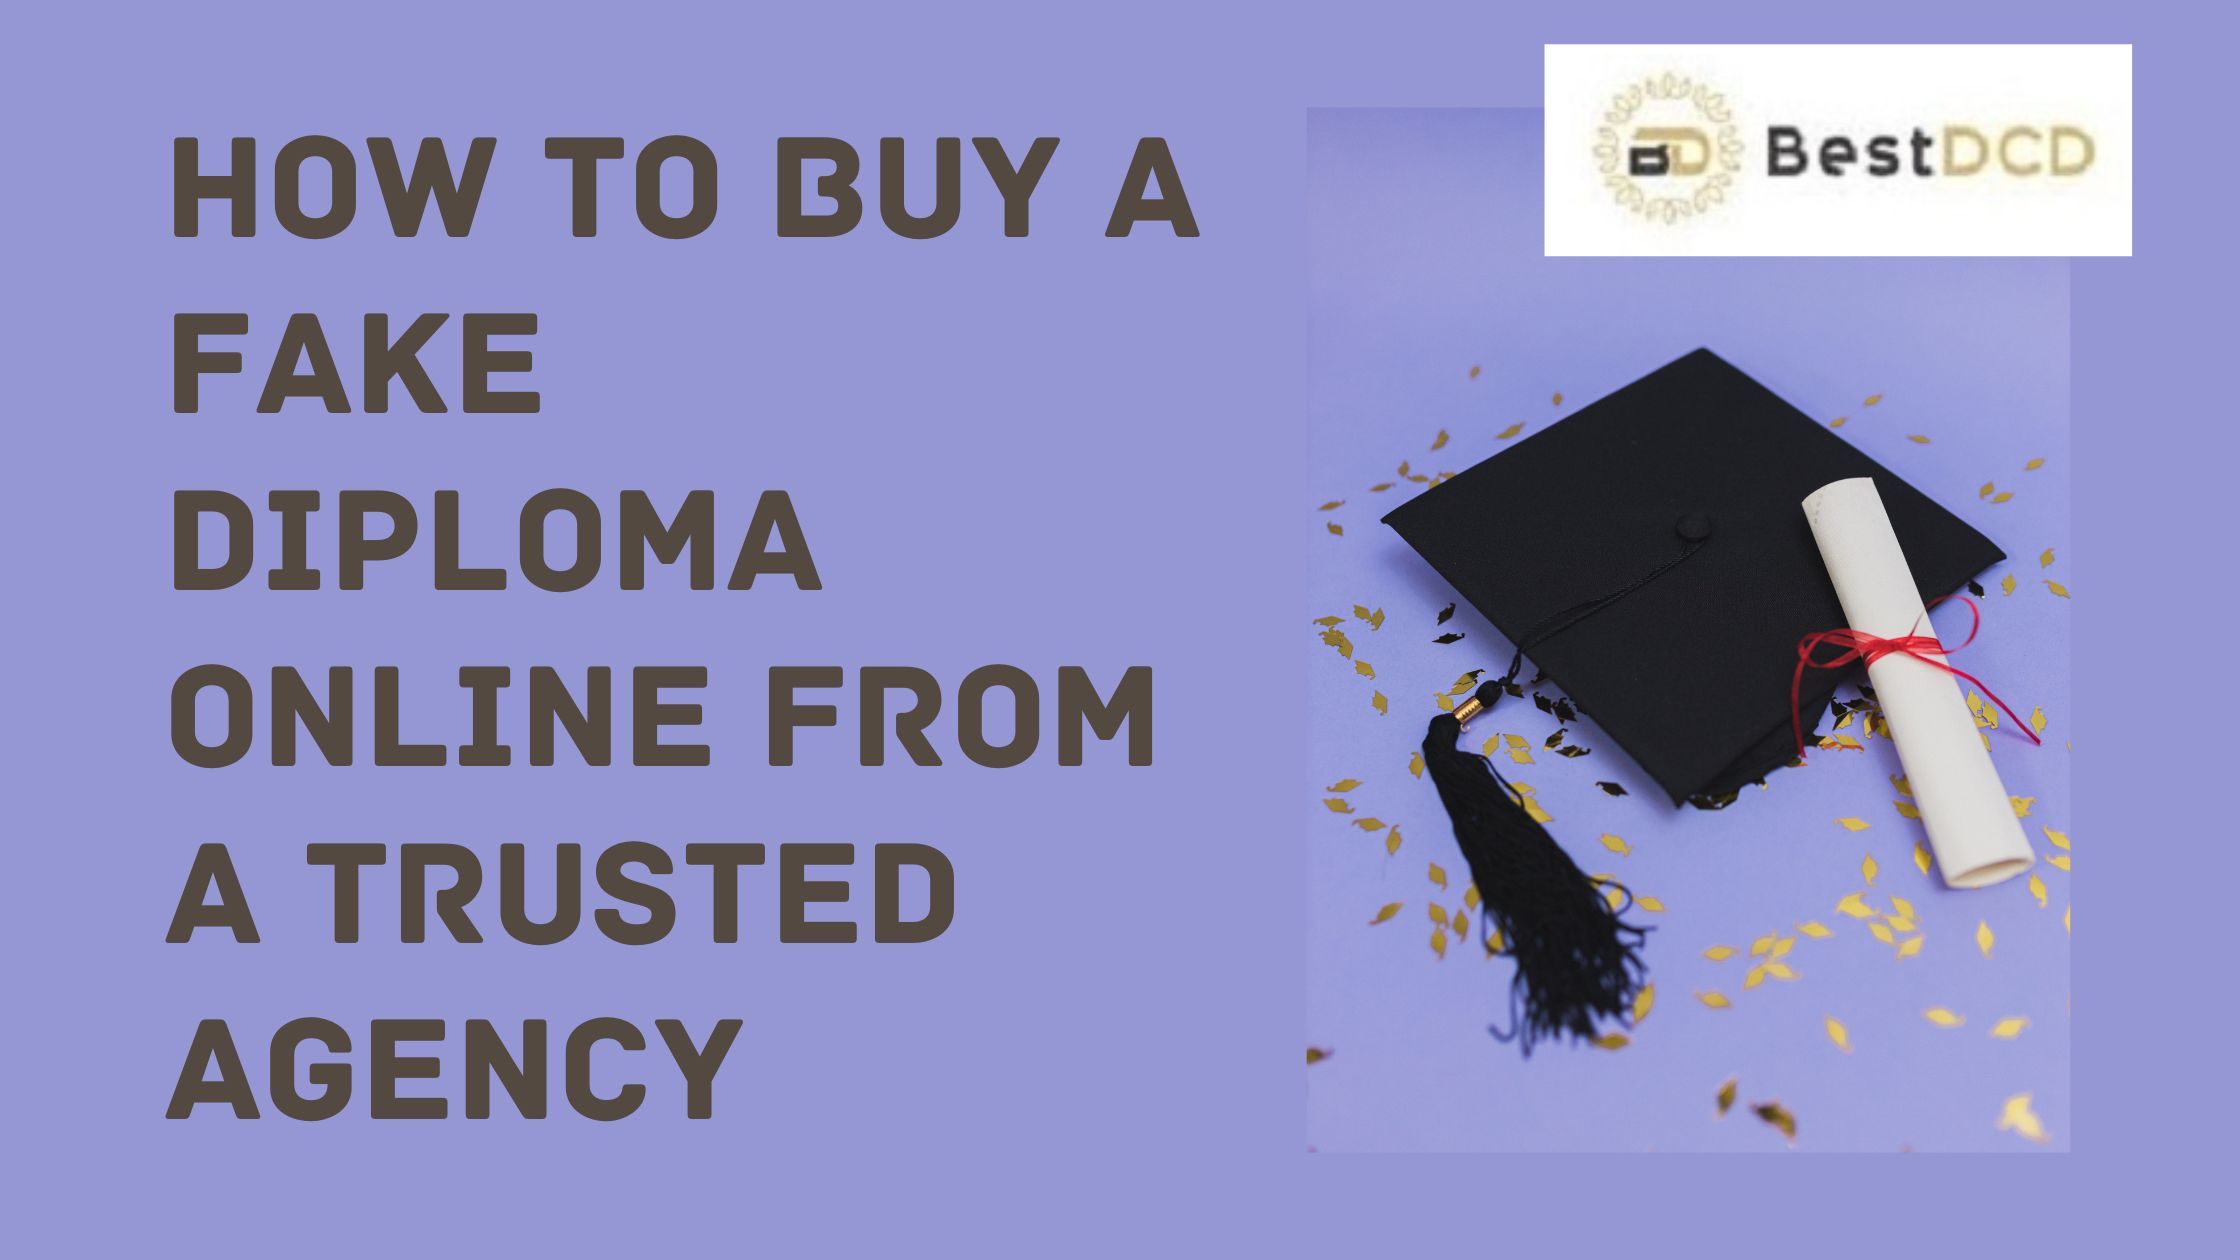 How to Buy A Fake Diploma Online From A Trusted Agency